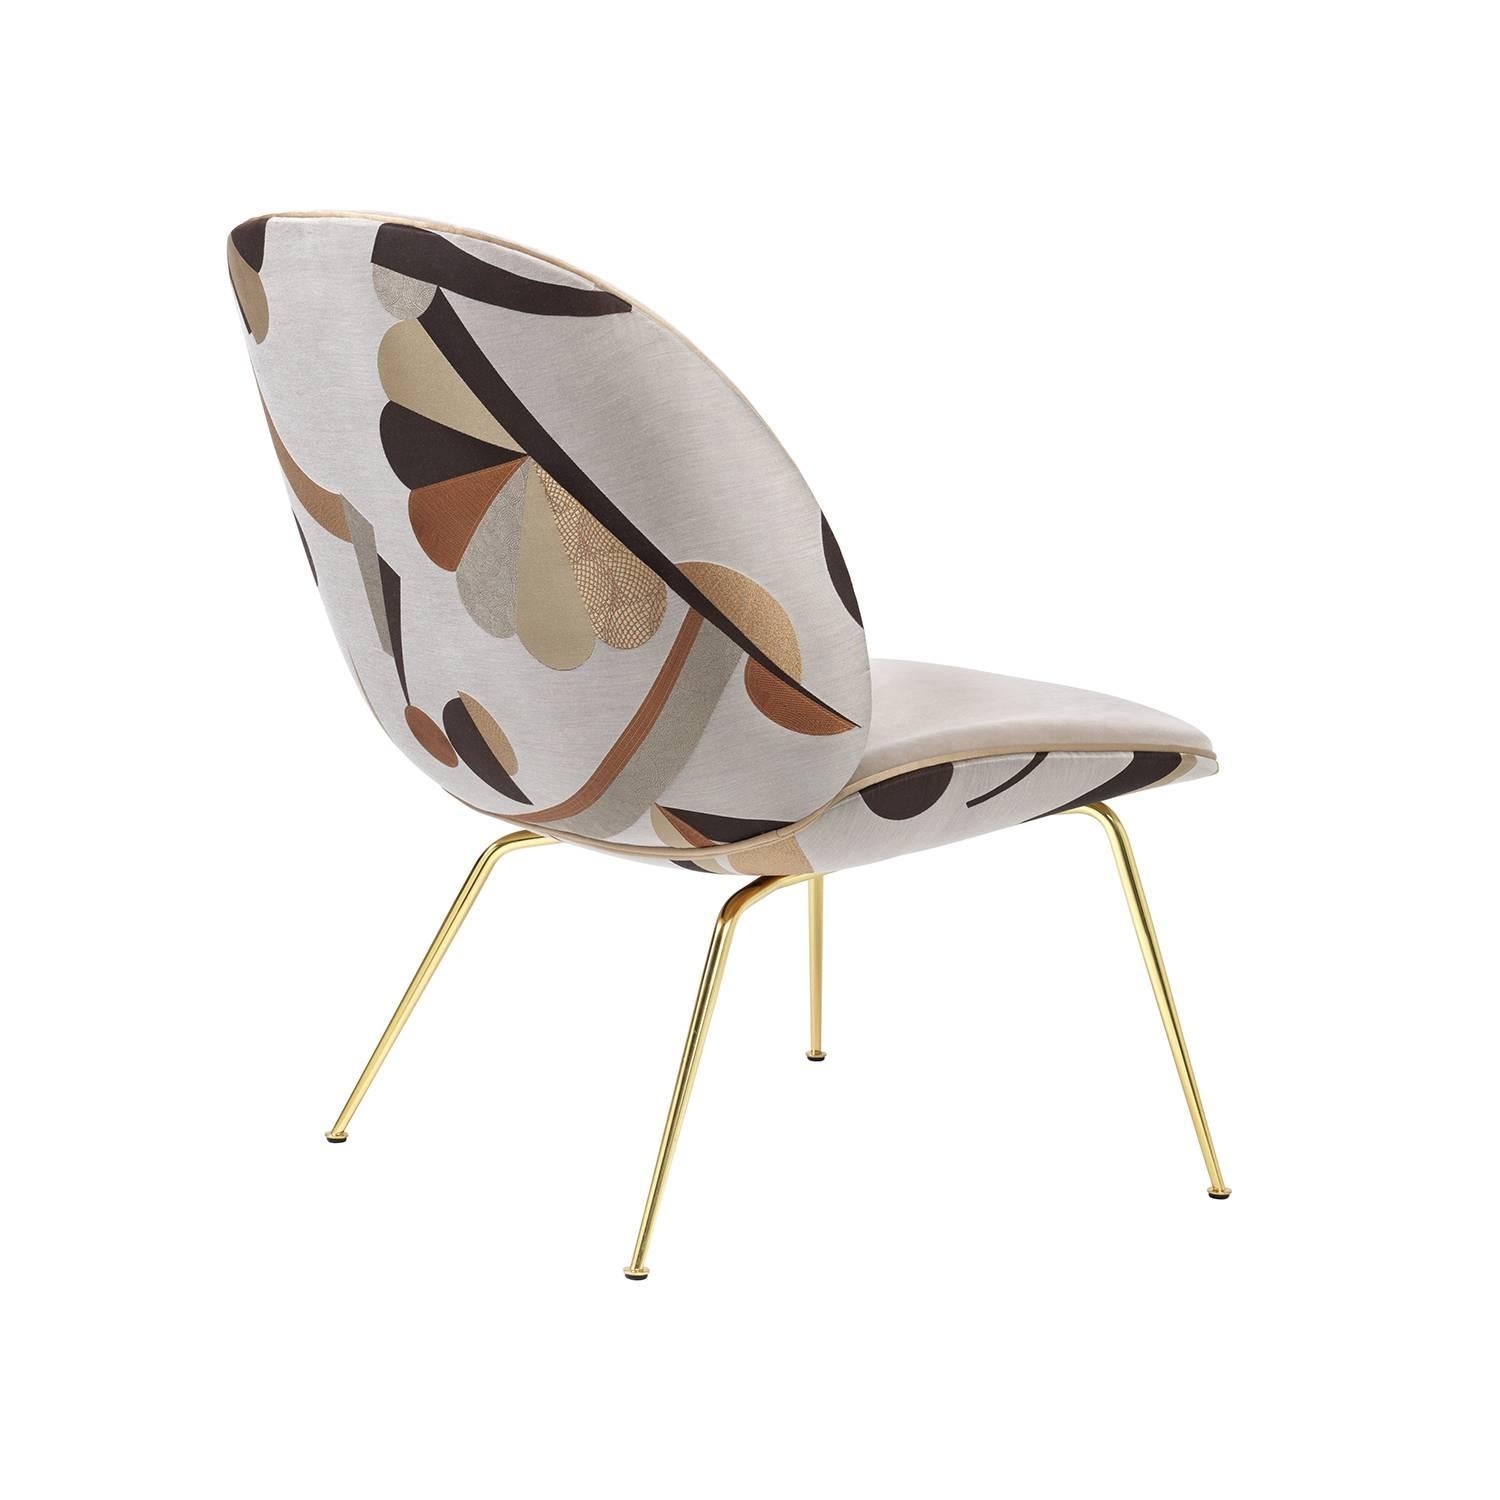 Danish Beetle Lounge Chair Fully Upholstered with Piping & Semi Matt Brass Base